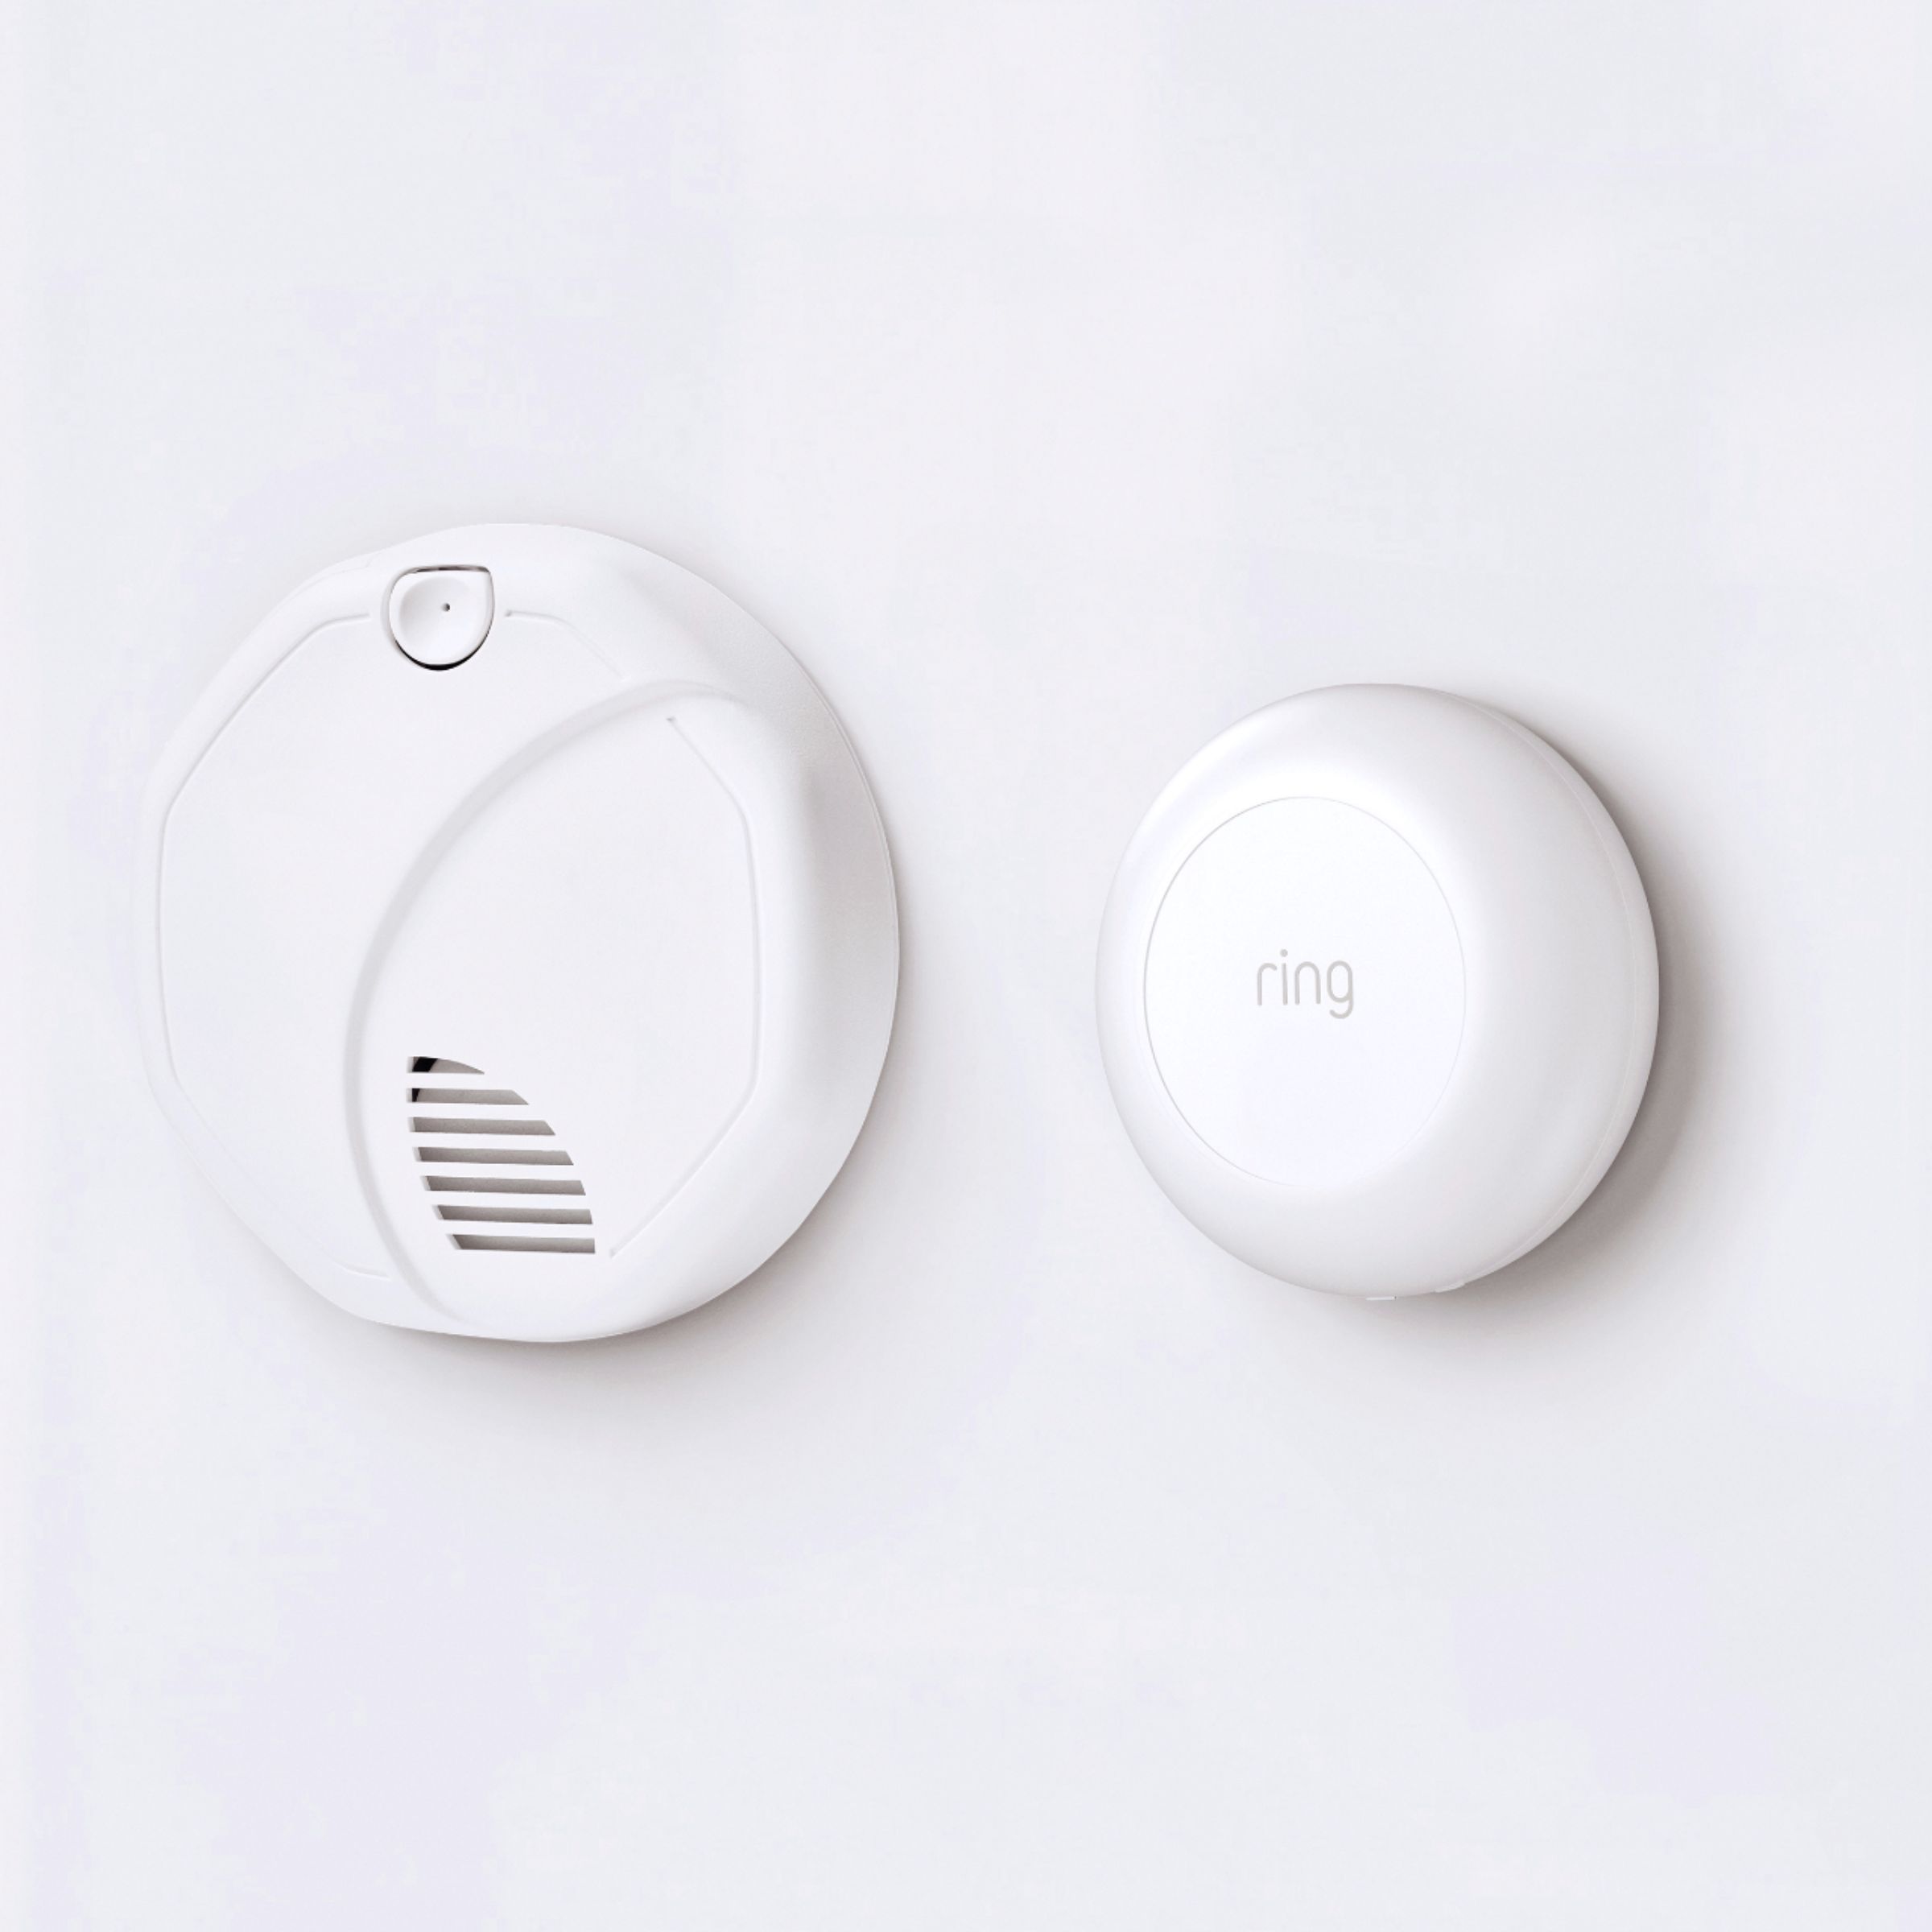 Ring Alarm removes free perks for millions of users – you'll have pay to  get them back